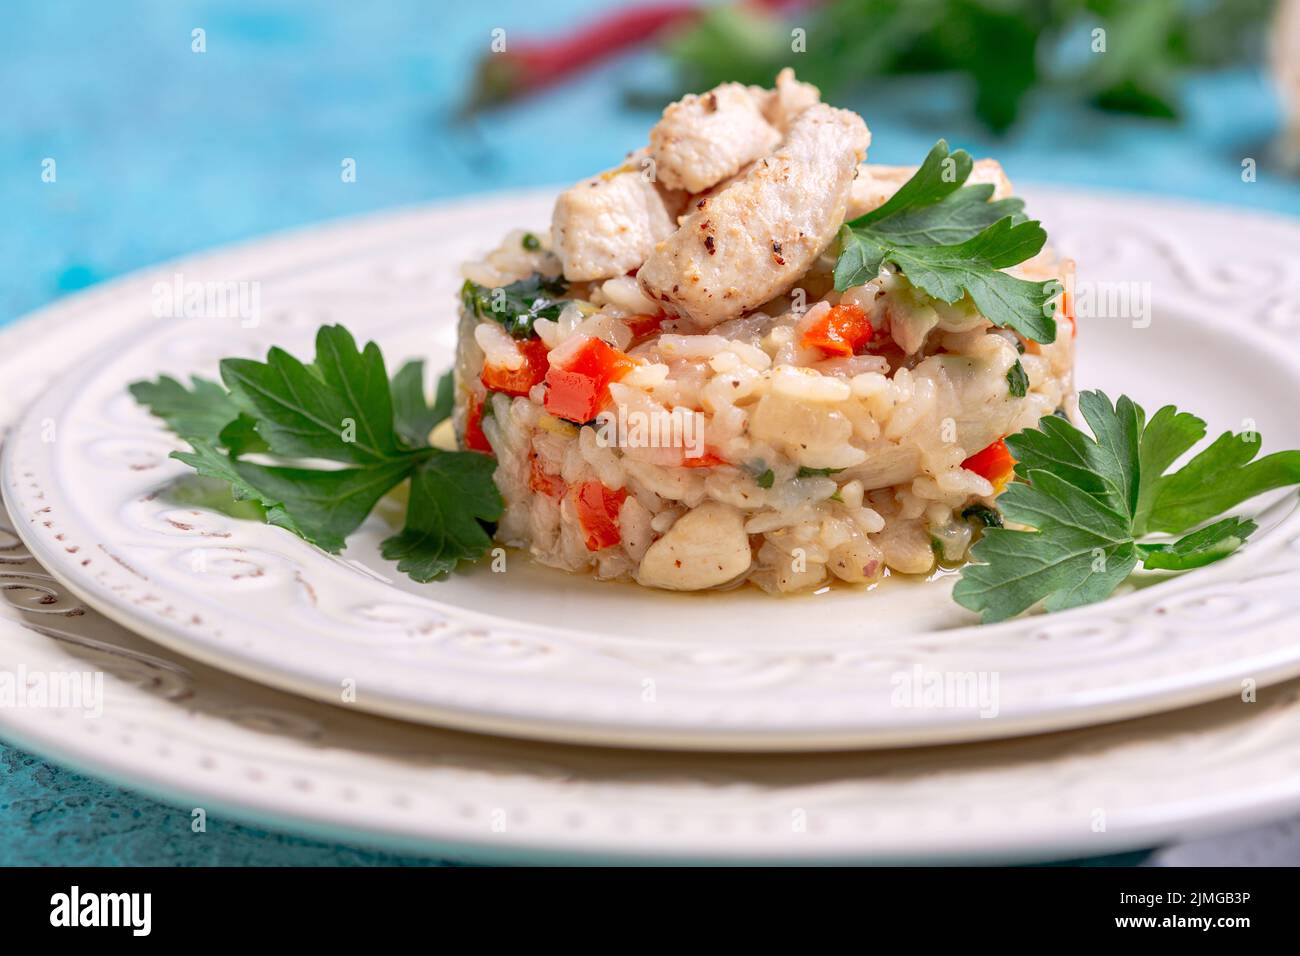 Homemade risotto with chicken. Stock Photo